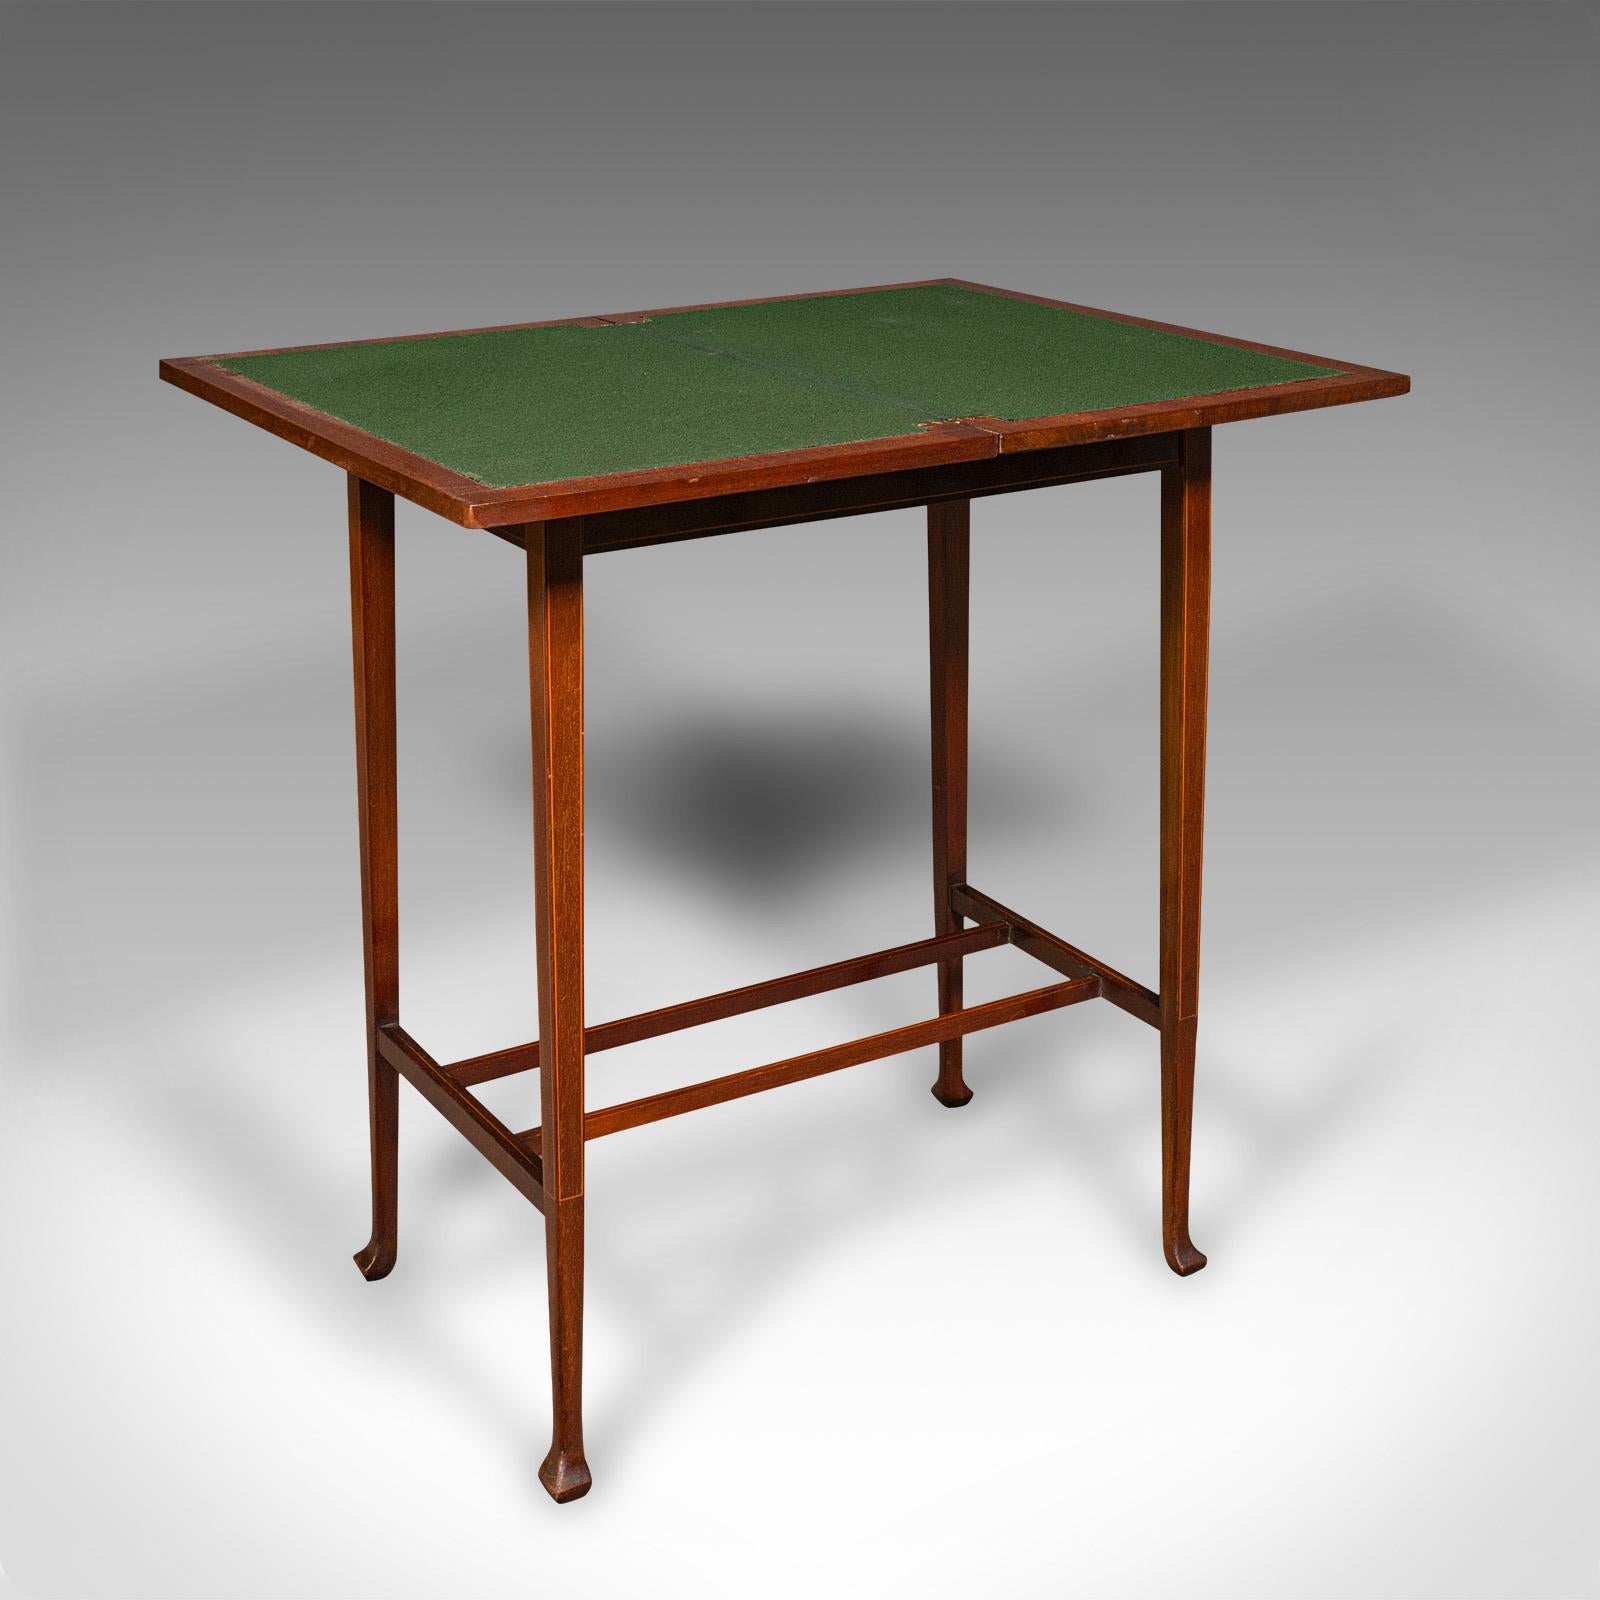 This is an antique fold-over games table. An English, mahogany card or side table, dating to the Edwardian period, circa 1910.

Charmingly petite, with exquisite craftsmanship
Displays a desirable aged patina and in good order
Select stocks present